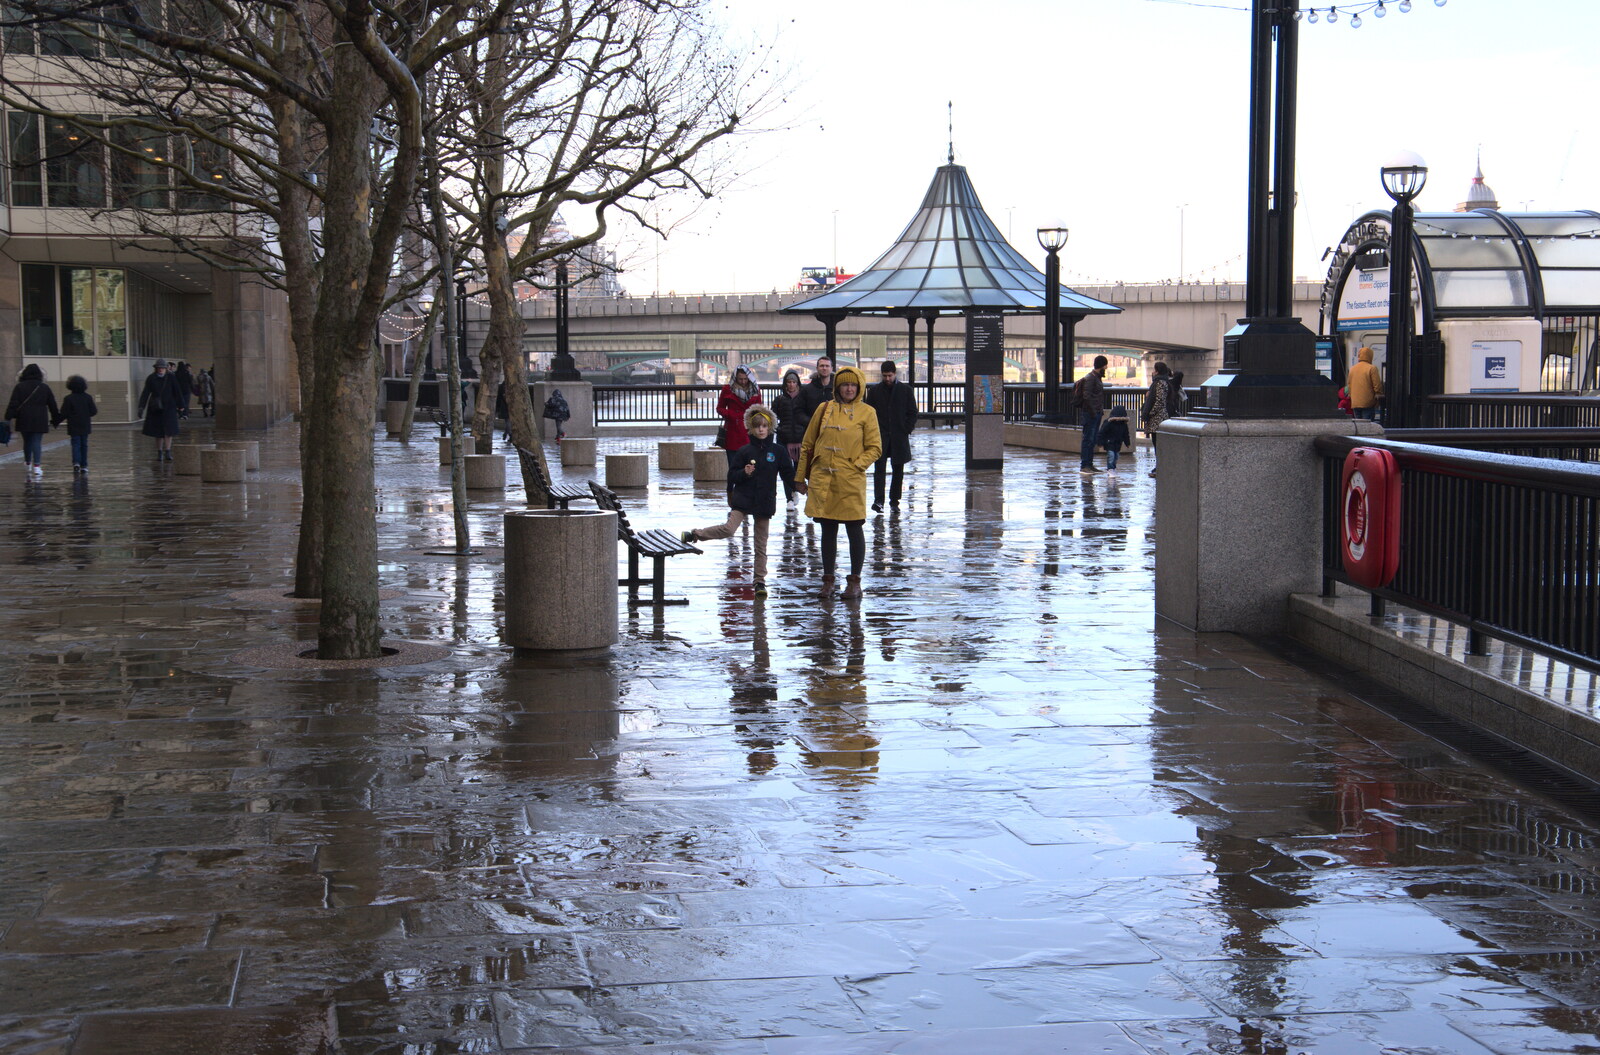 Wet stones after a brief downpour from HMS Belfast and the South Bank, Southwark, London - 17th February 2020